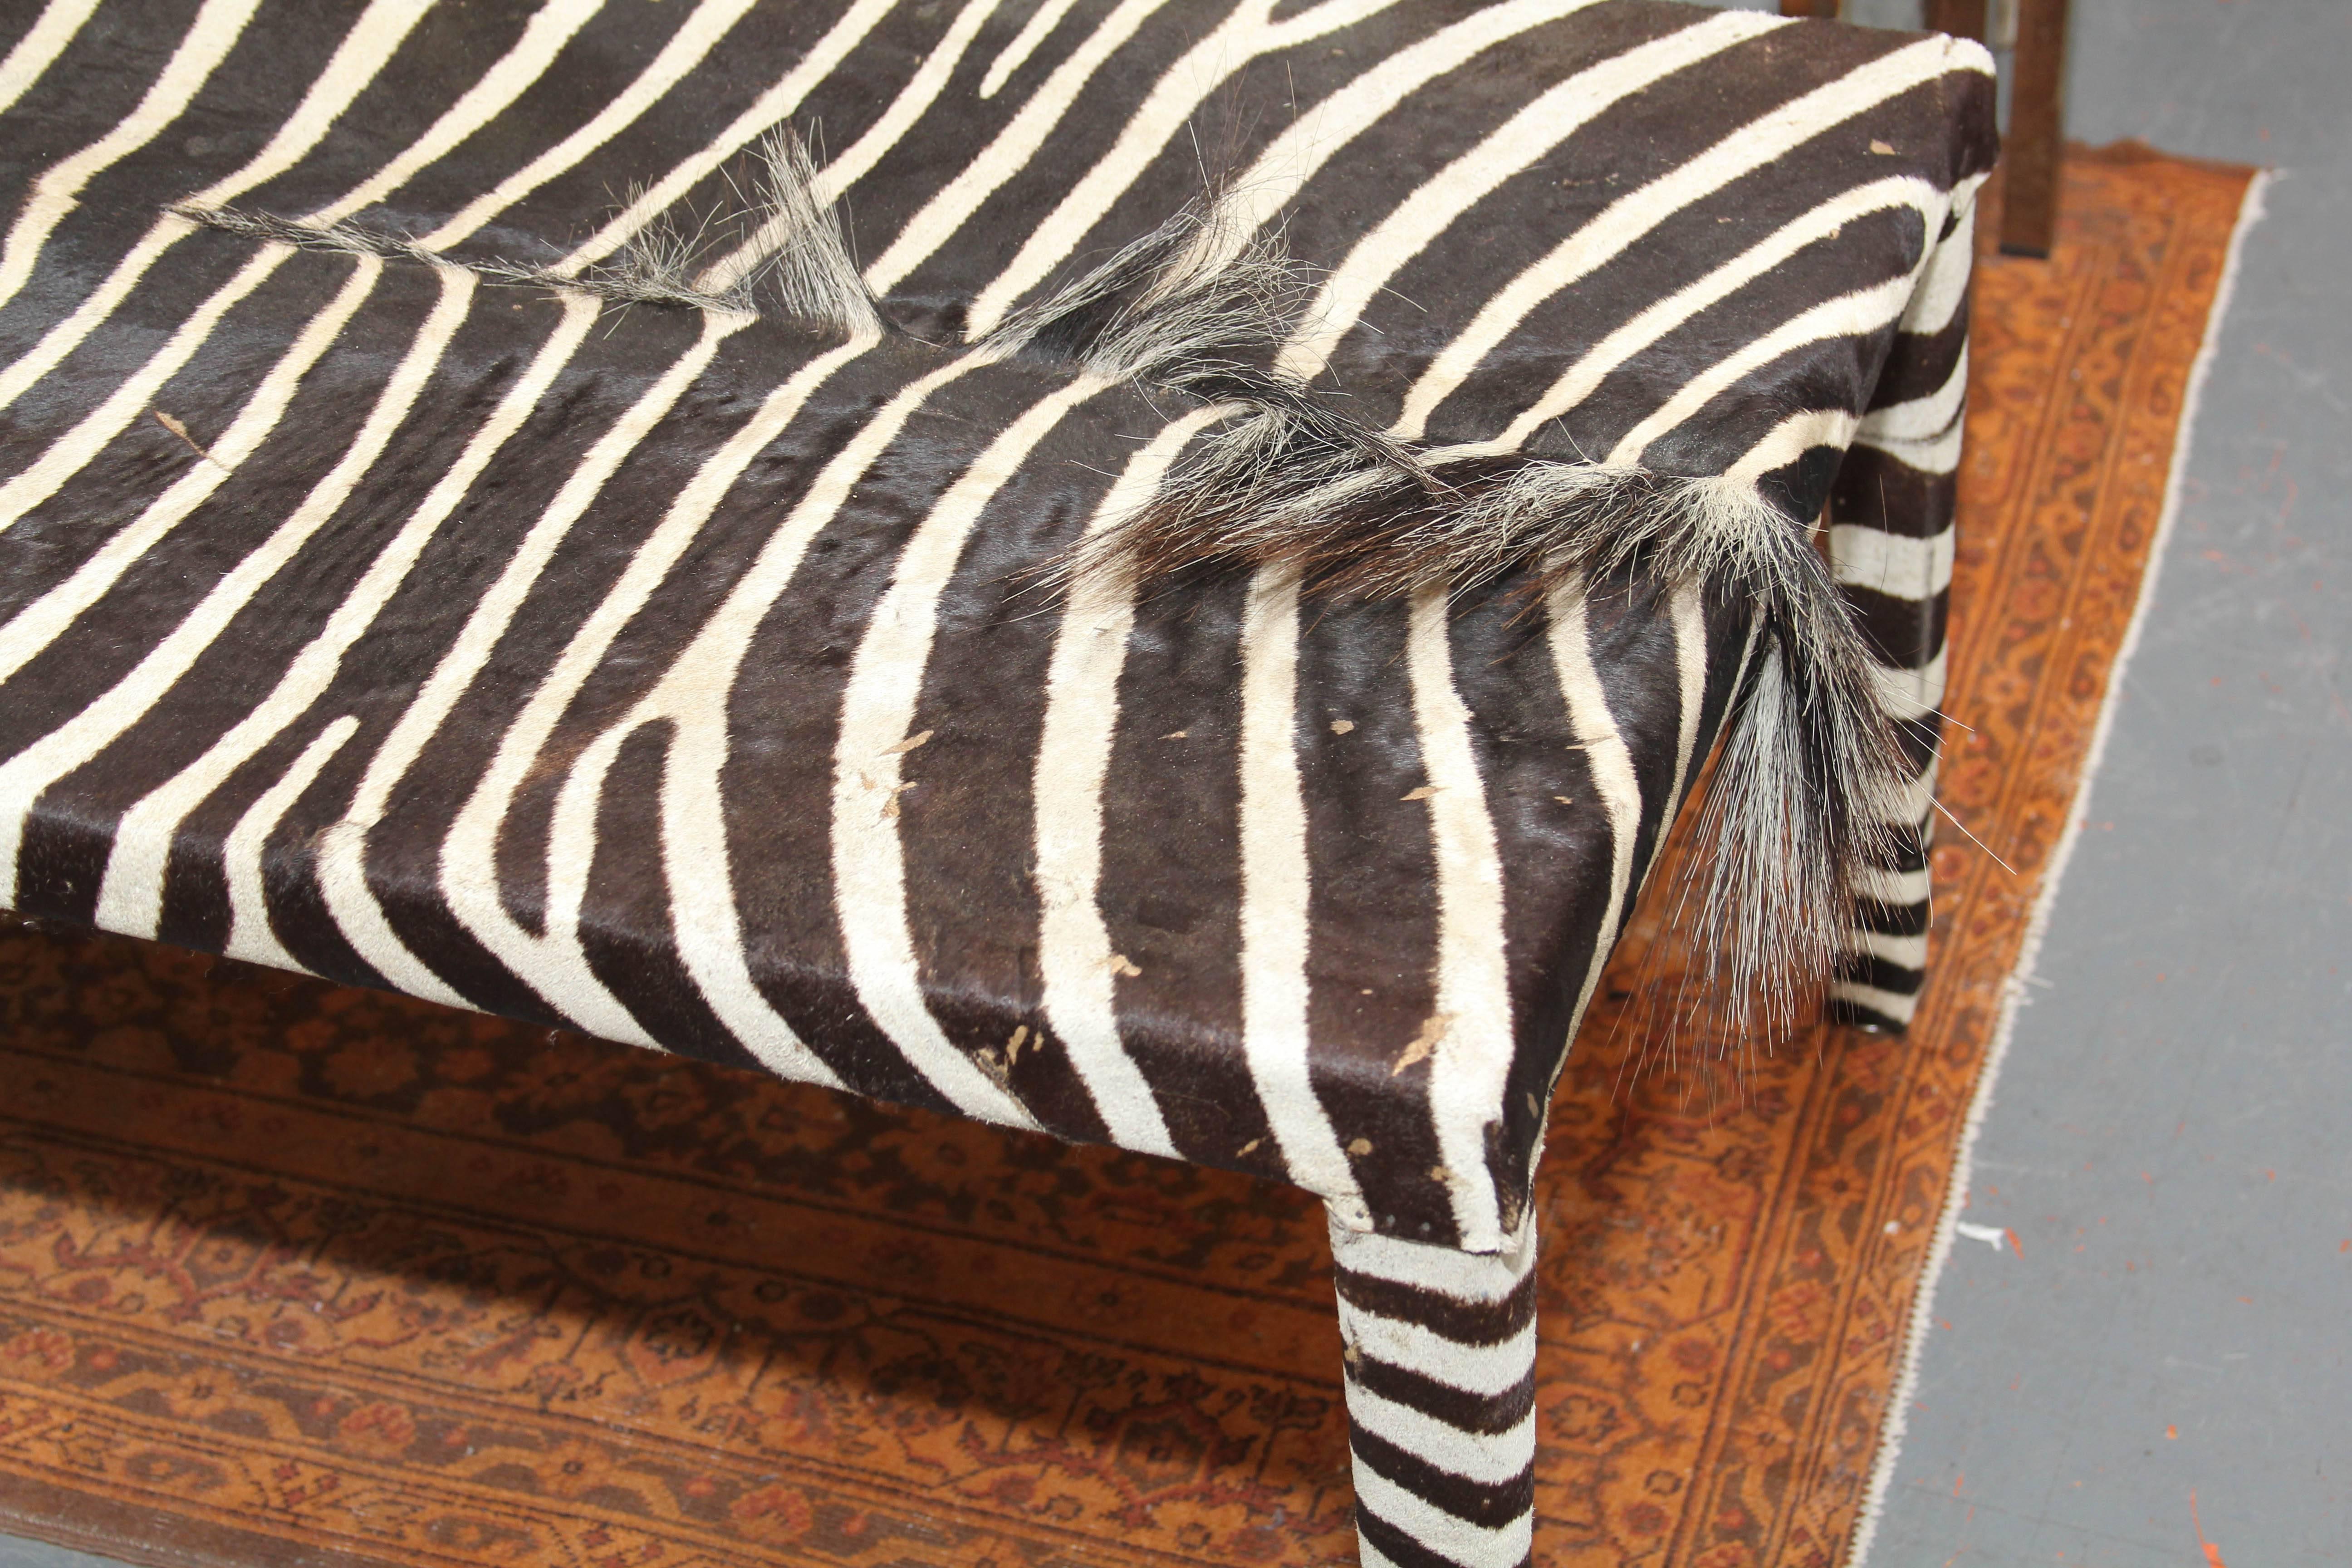 Striking black and white zebra coffee table or bench. Generous length shows of the beauty of the hide and works well as table or at the foot of a bed.